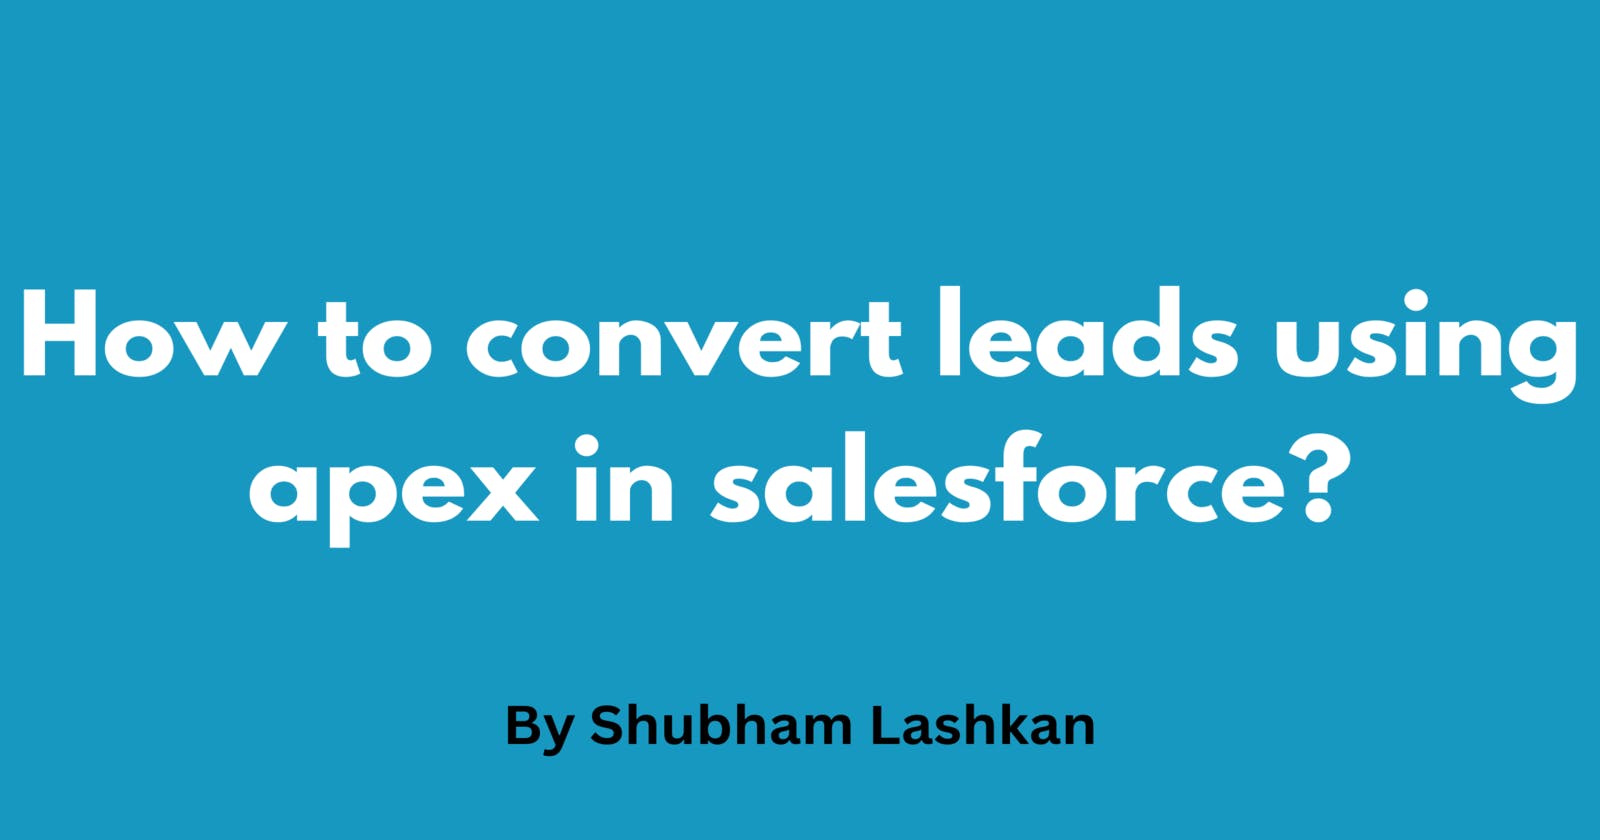 How to convert leads using apex in salesforce?